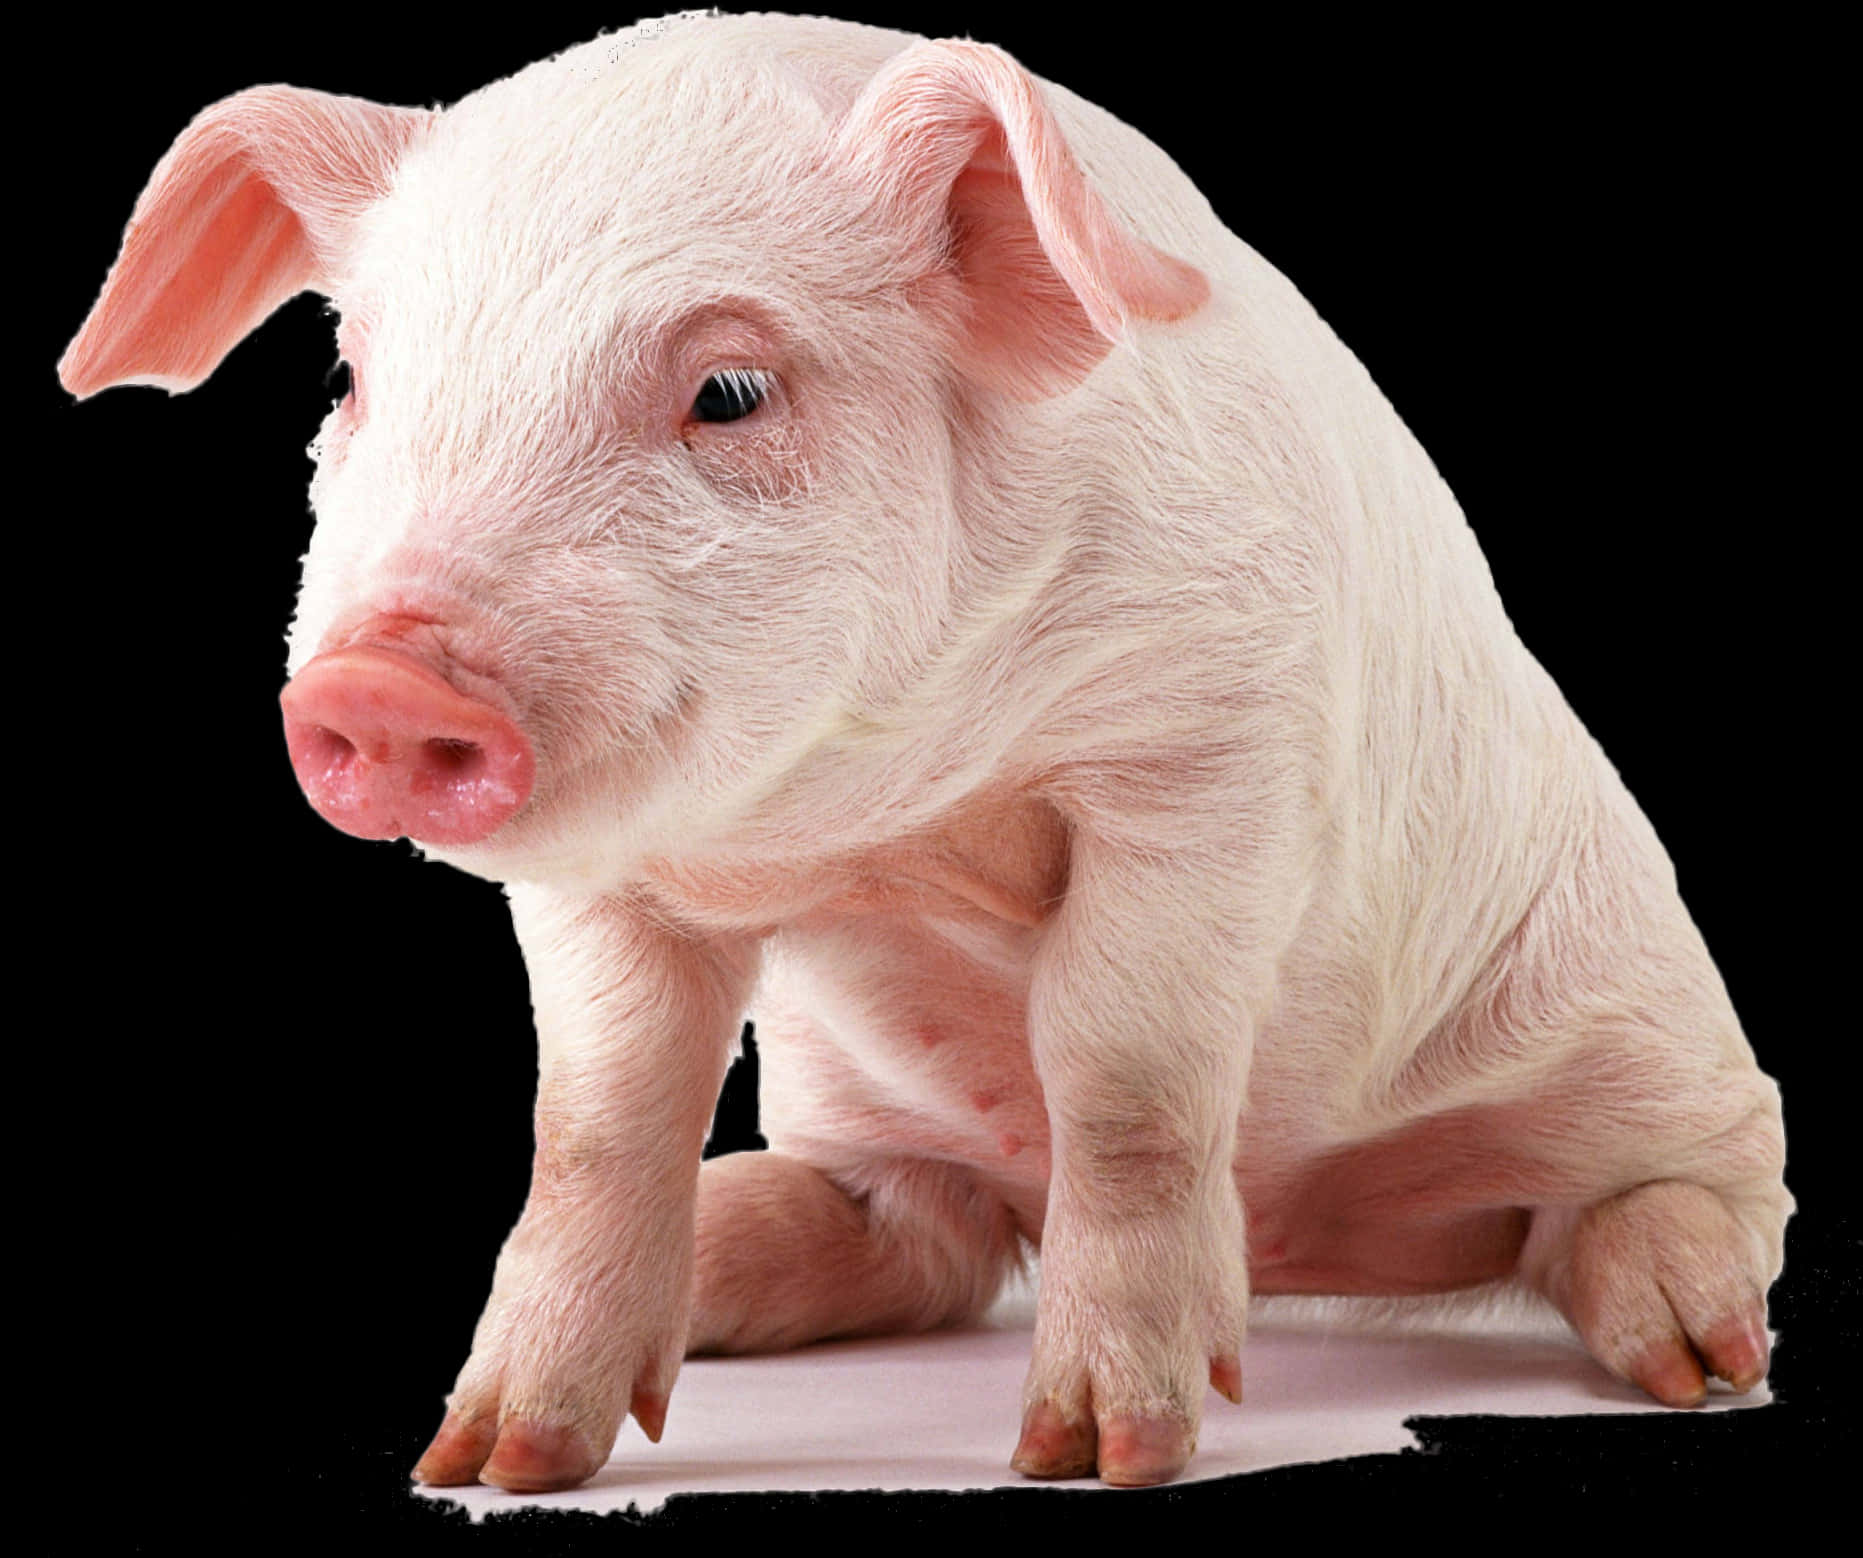 A Pig Sitting On A Black Background